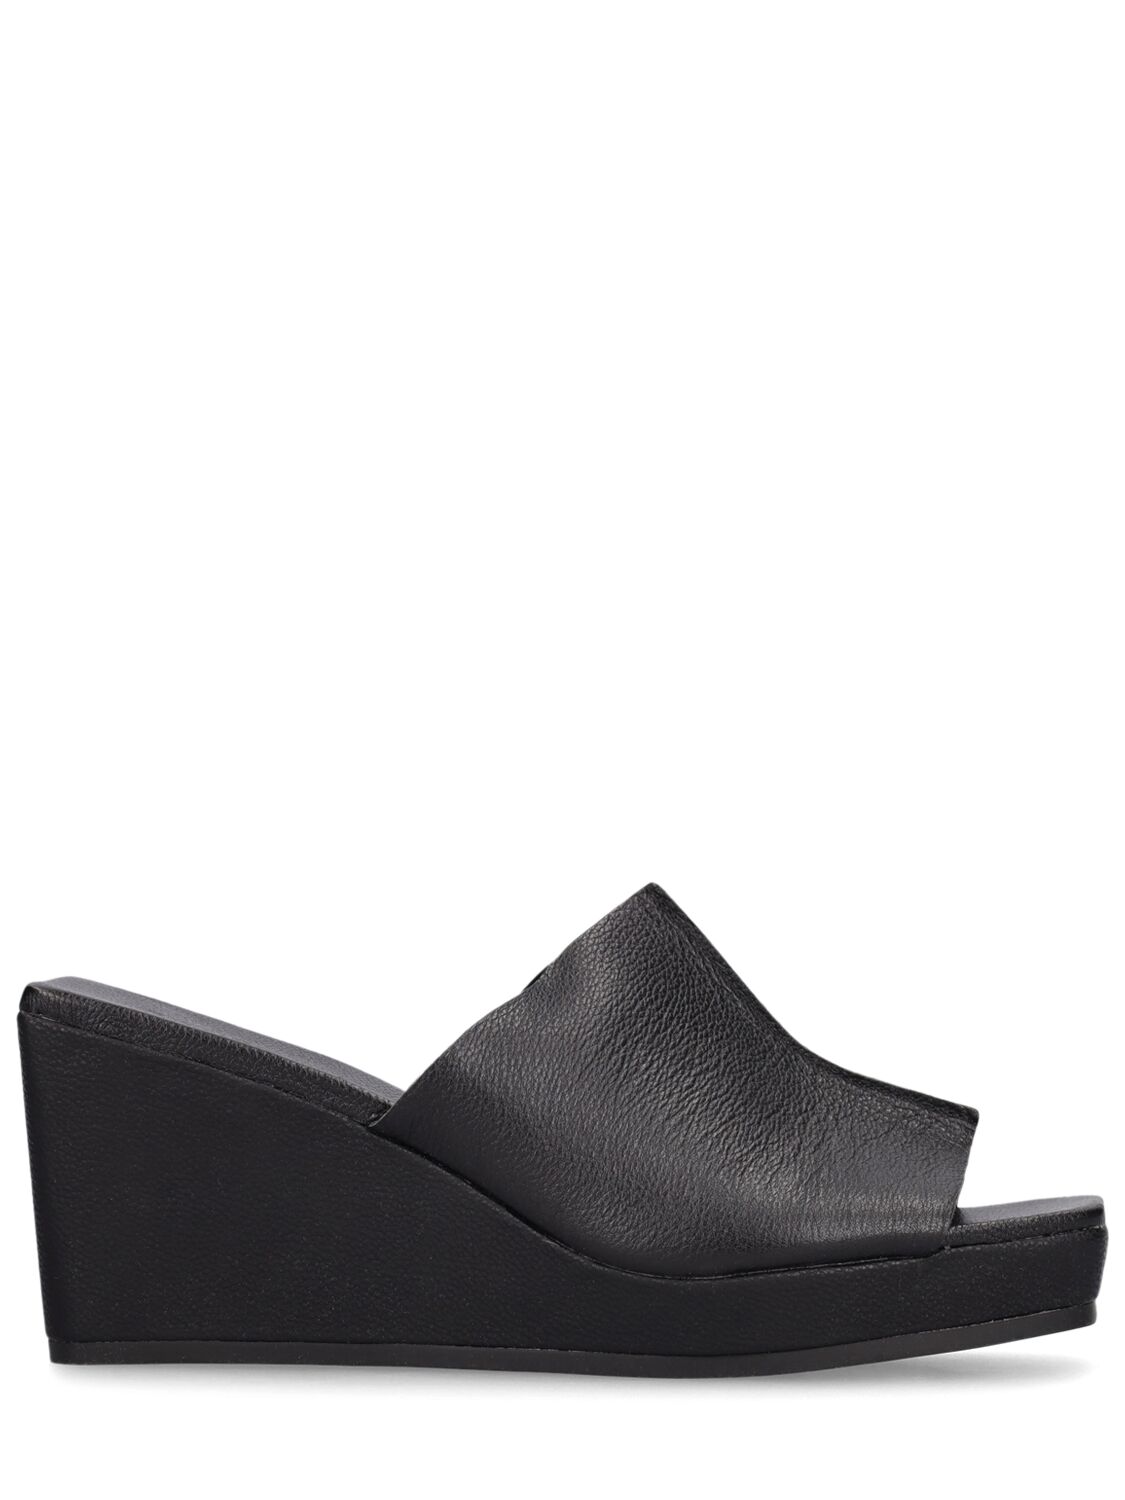 St.agni 80mm Maria Leather Wedges In Black